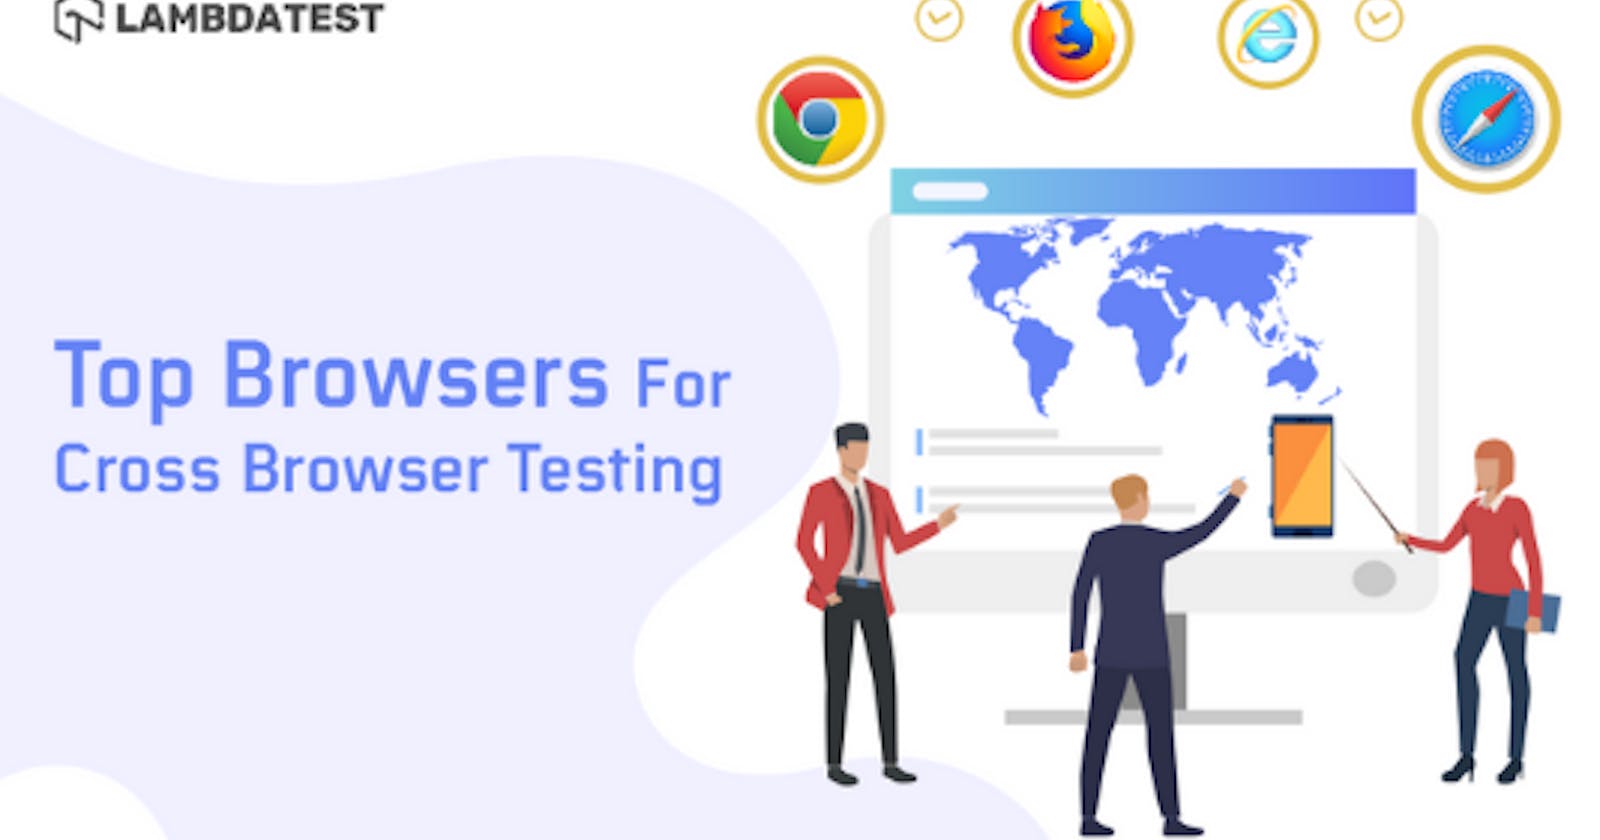 Here Are The Top Browsers For Cross Browser Testing In 2020